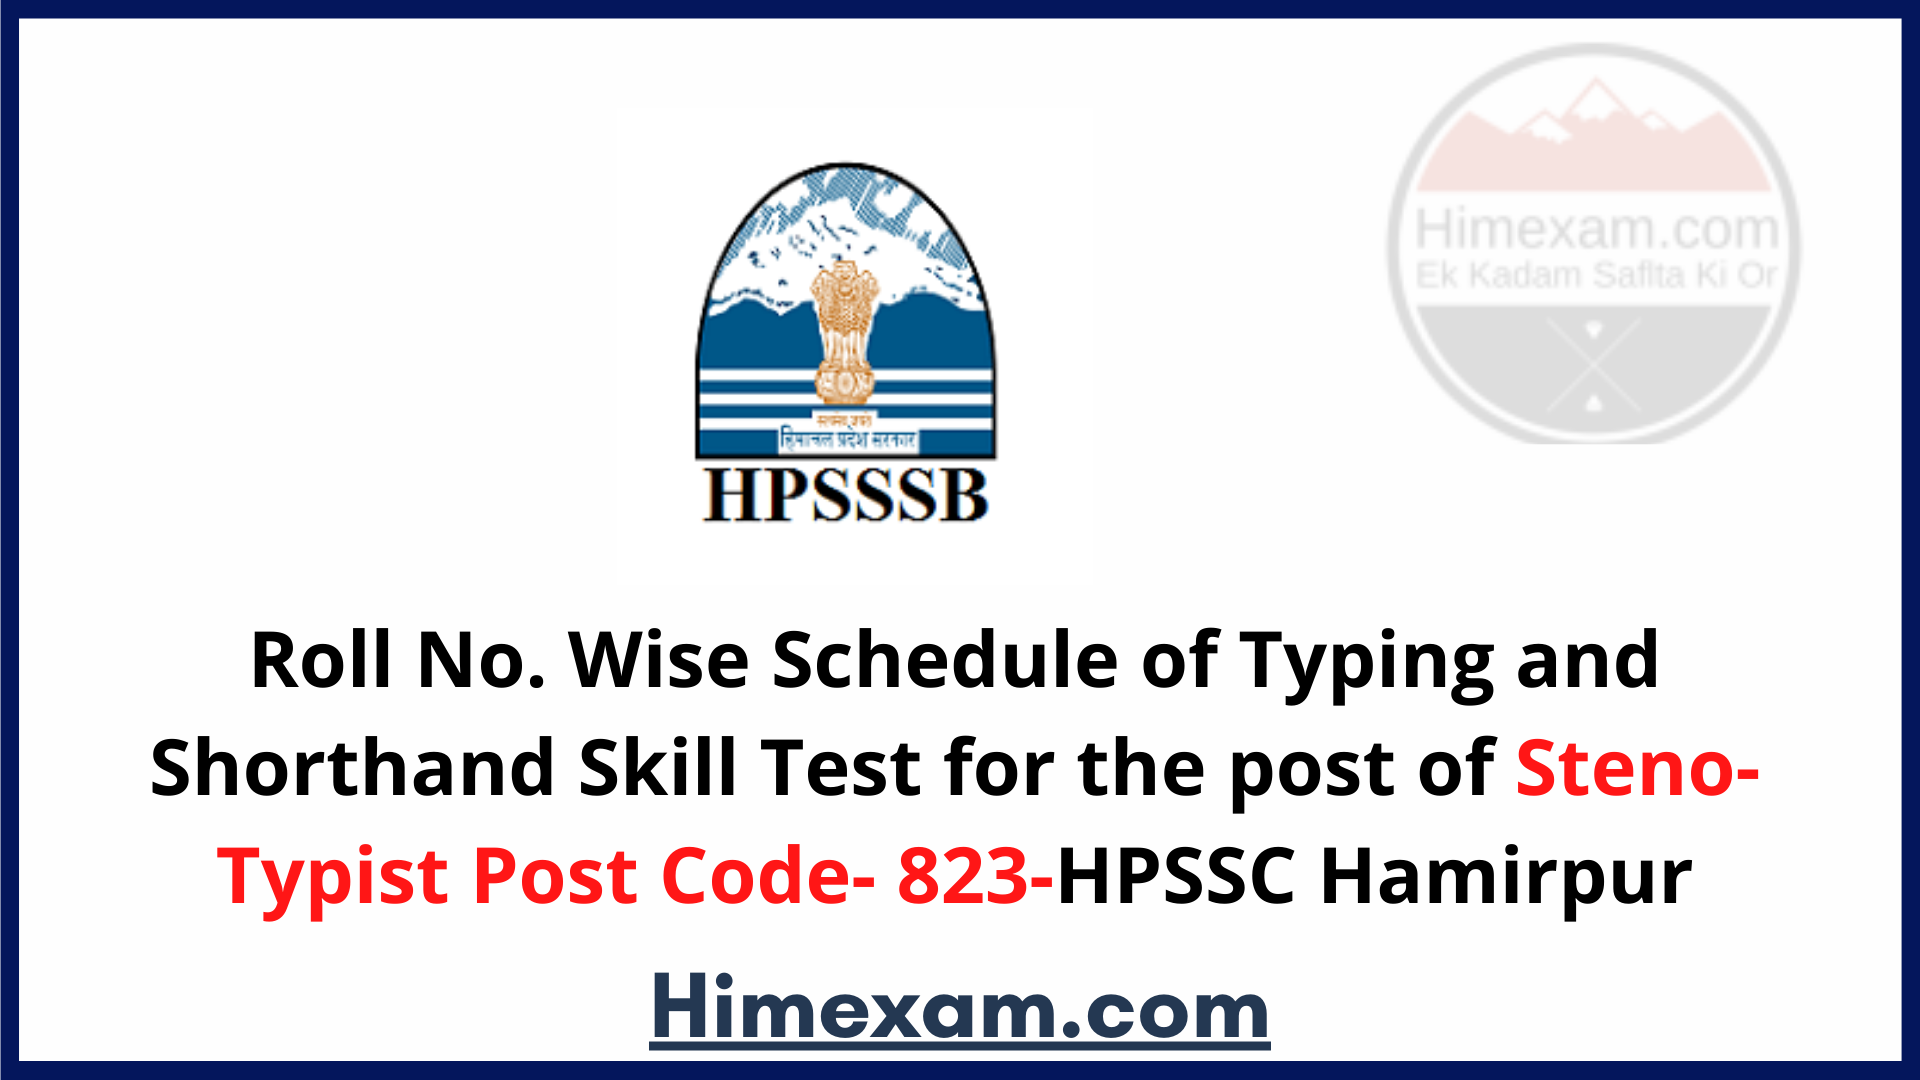 Roll No. Wise Schedule of Typing and Shorthand Skill Test for the post of Steno-Typist Post Code- 823-HPSSC Hamirpur